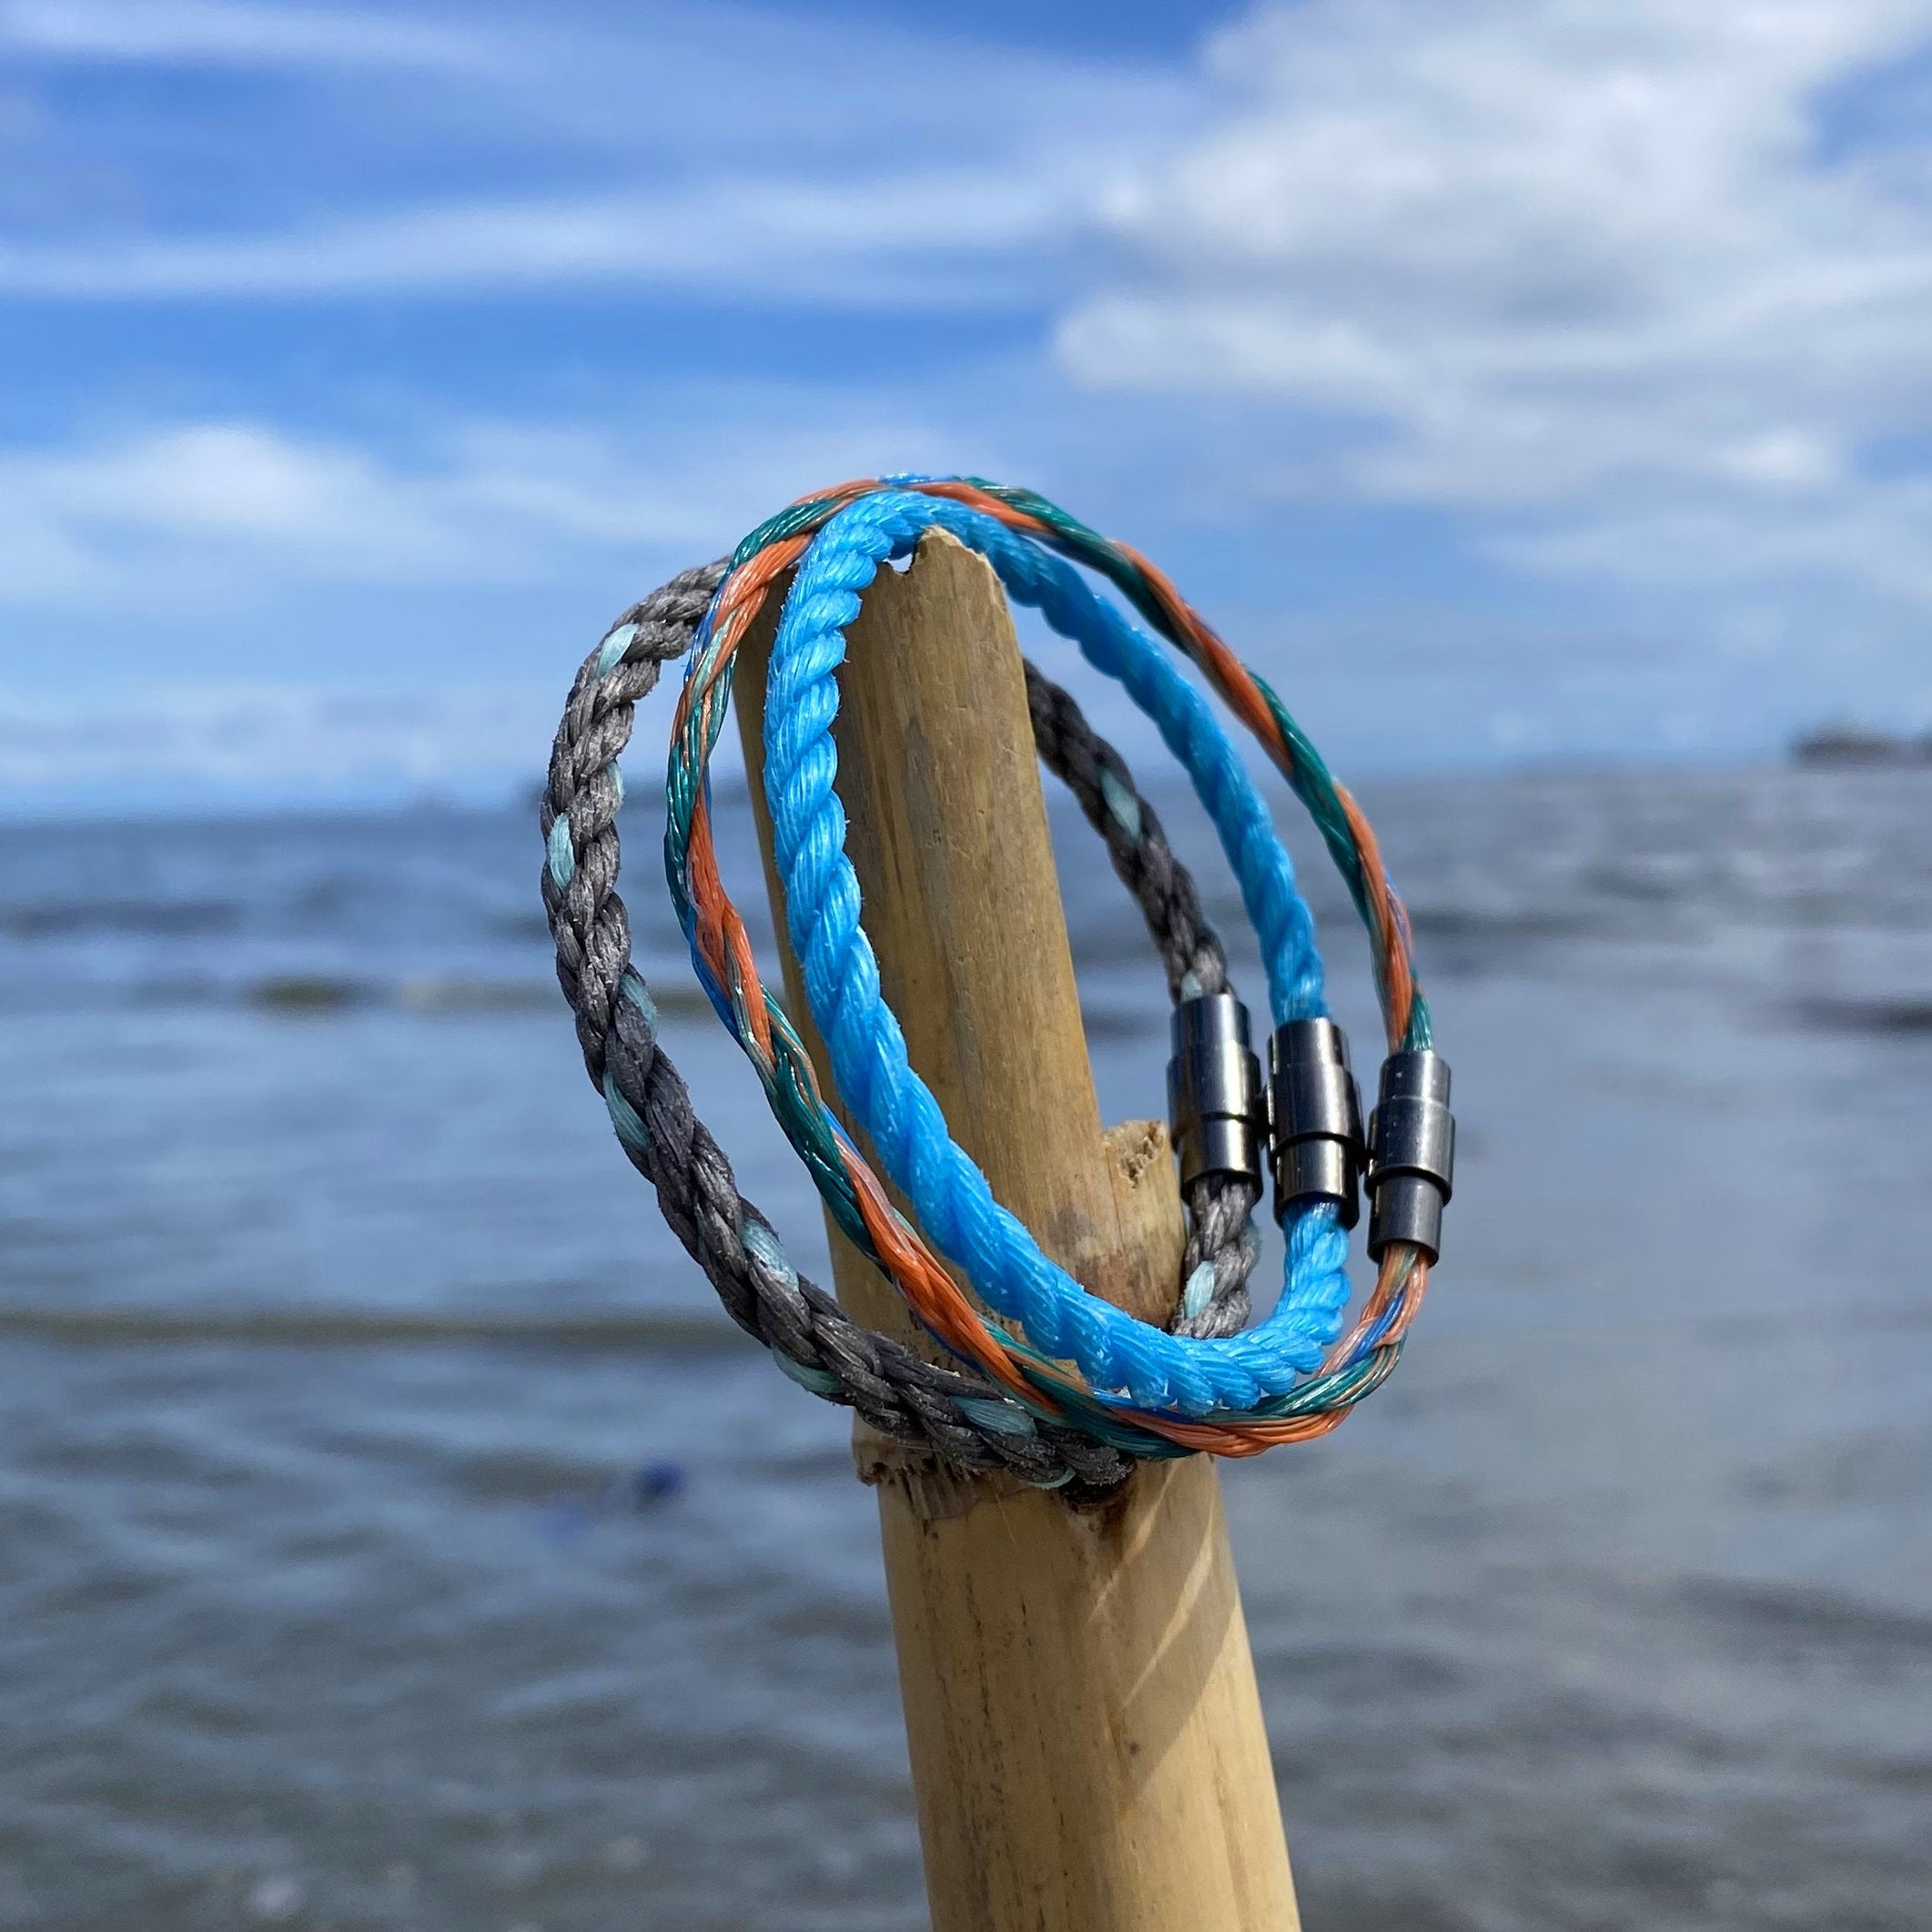 3 SeaSweeper unbreakable bracelets being held up in front of the beach by bamboo.